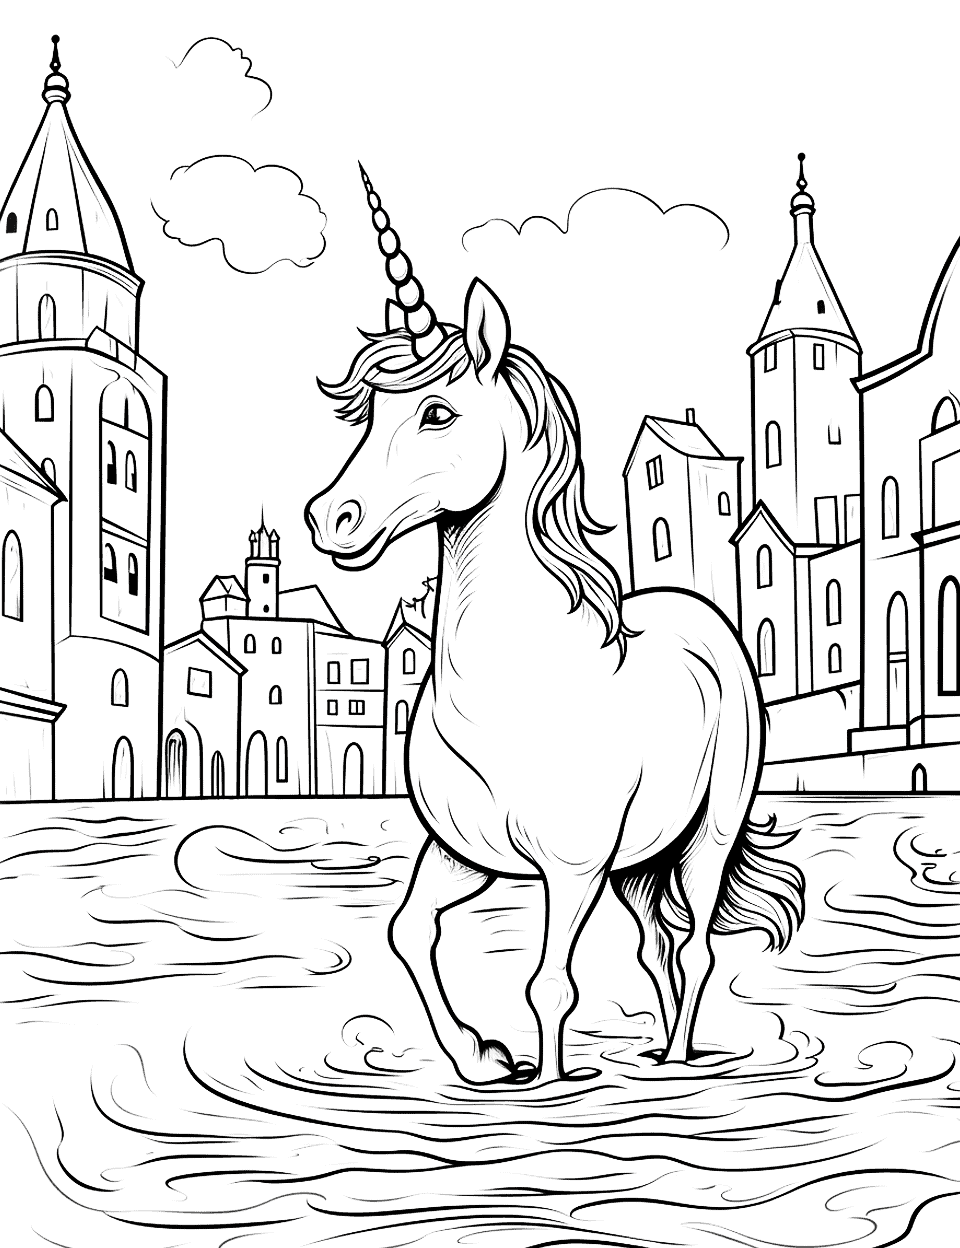 Unicorn in Venice Coloring Page - A unicorn walking on a water surface with Venetian buildings in the background.